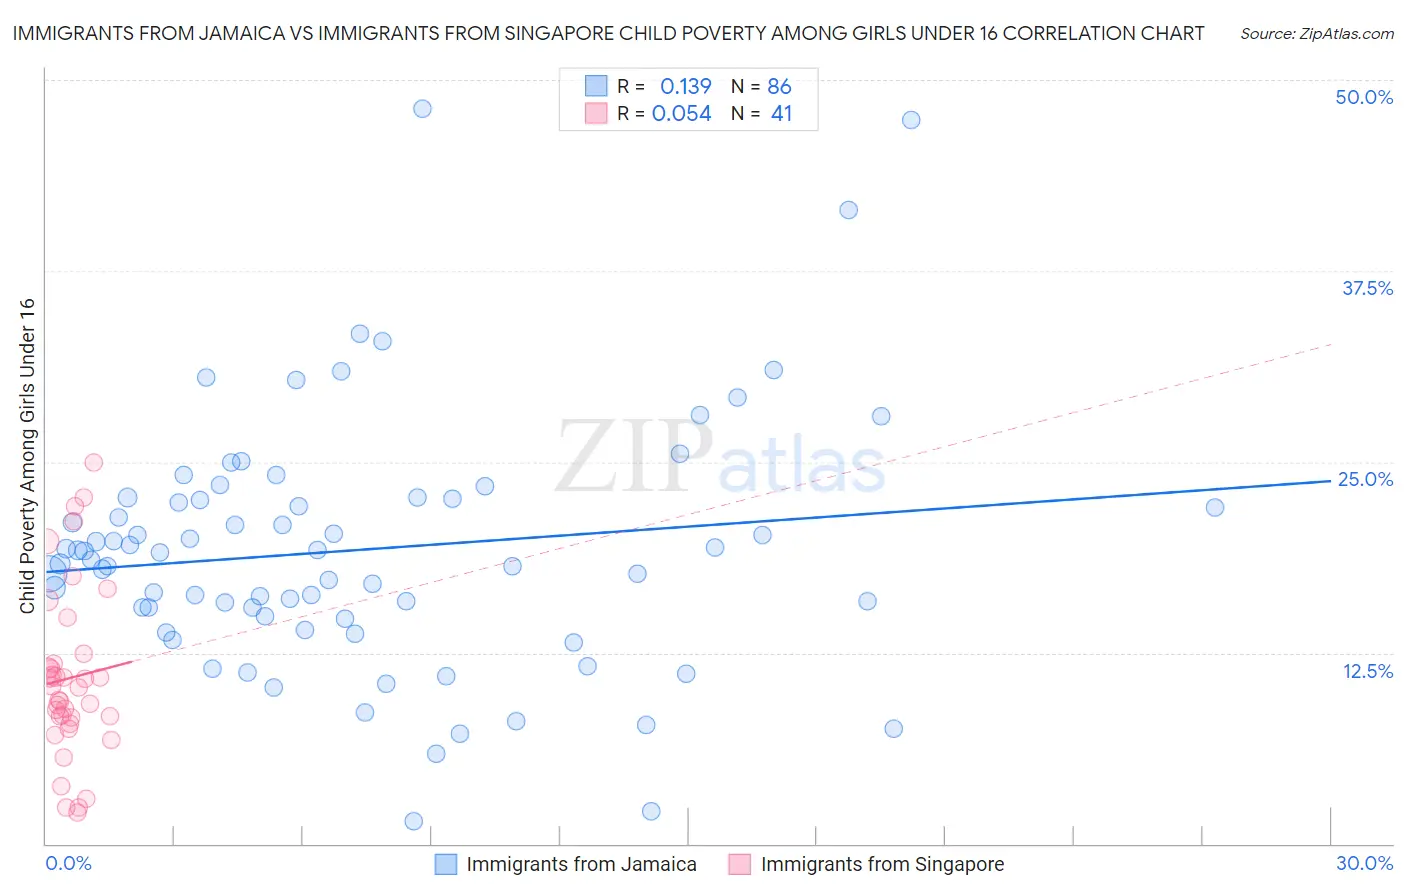 Immigrants from Jamaica vs Immigrants from Singapore Child Poverty Among Girls Under 16